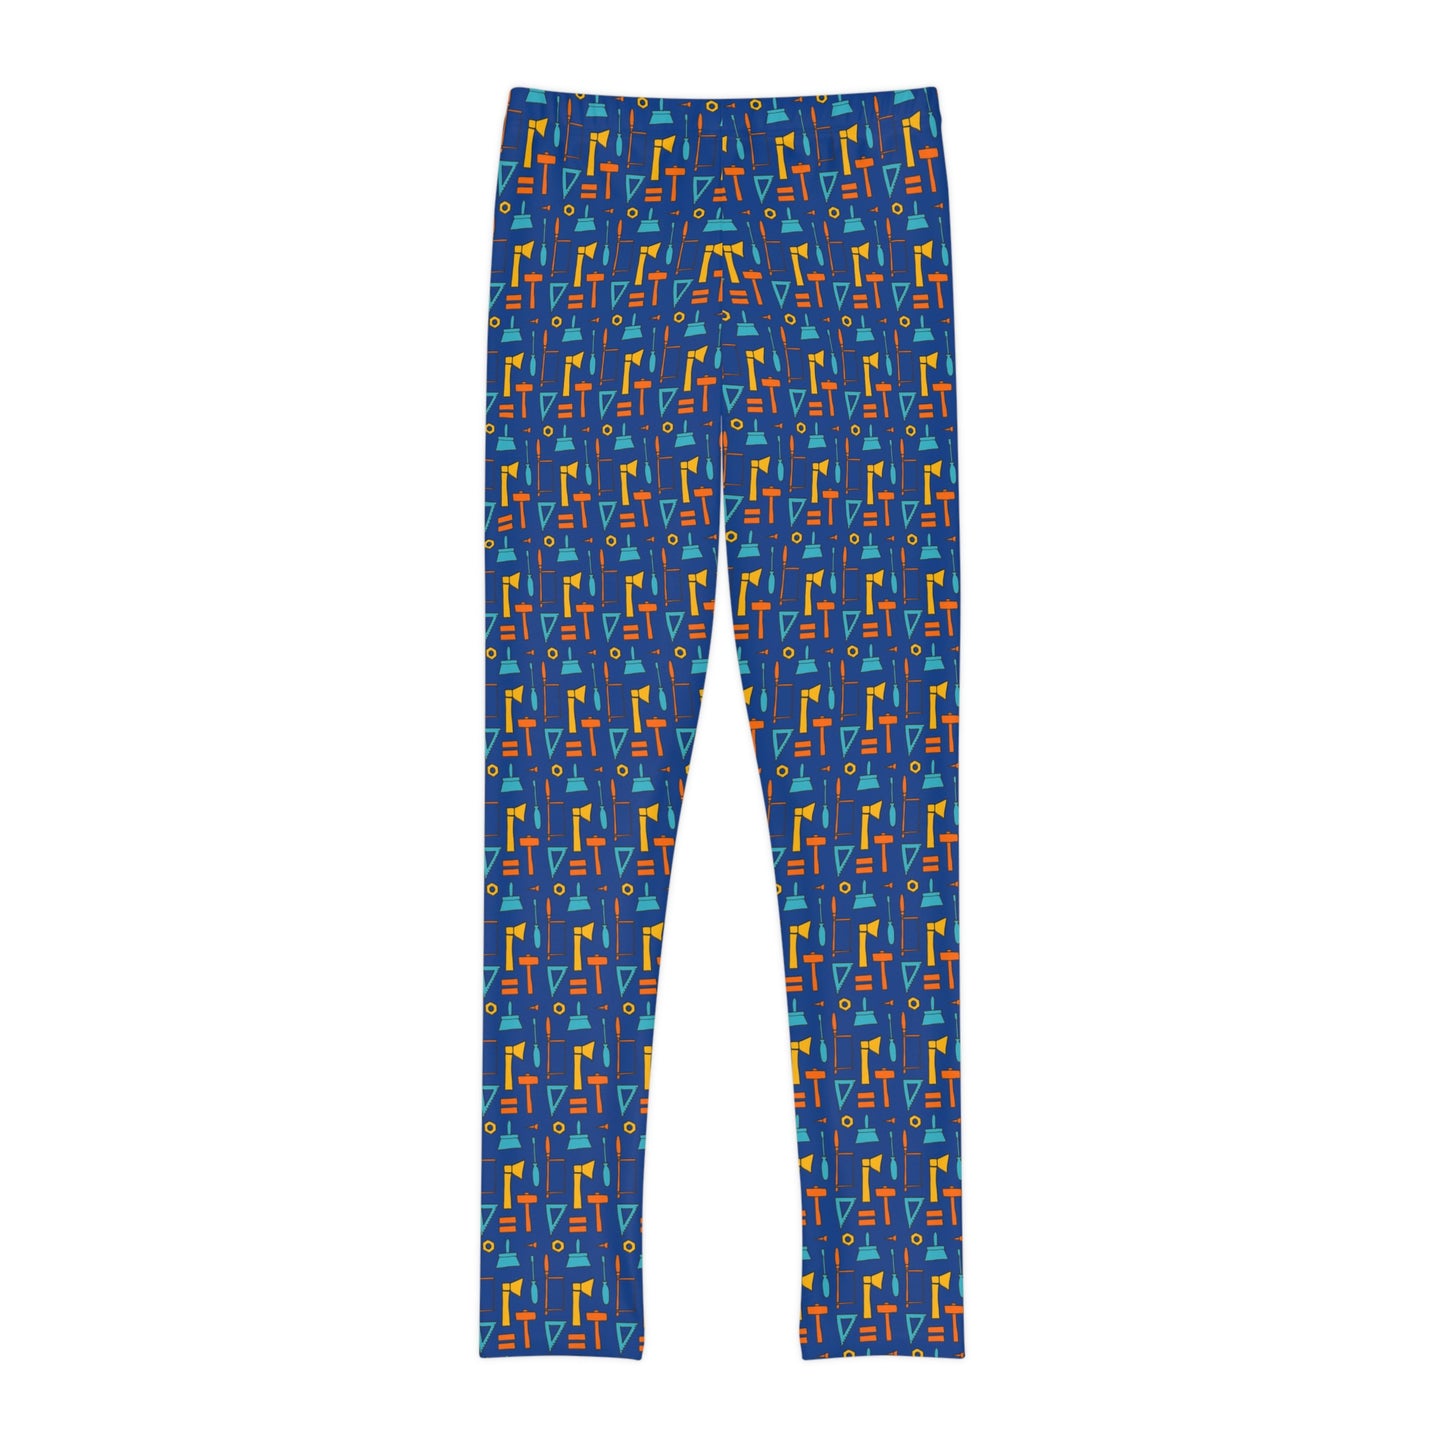 Construction tools, workshop tools Youth Full-Length Leggings